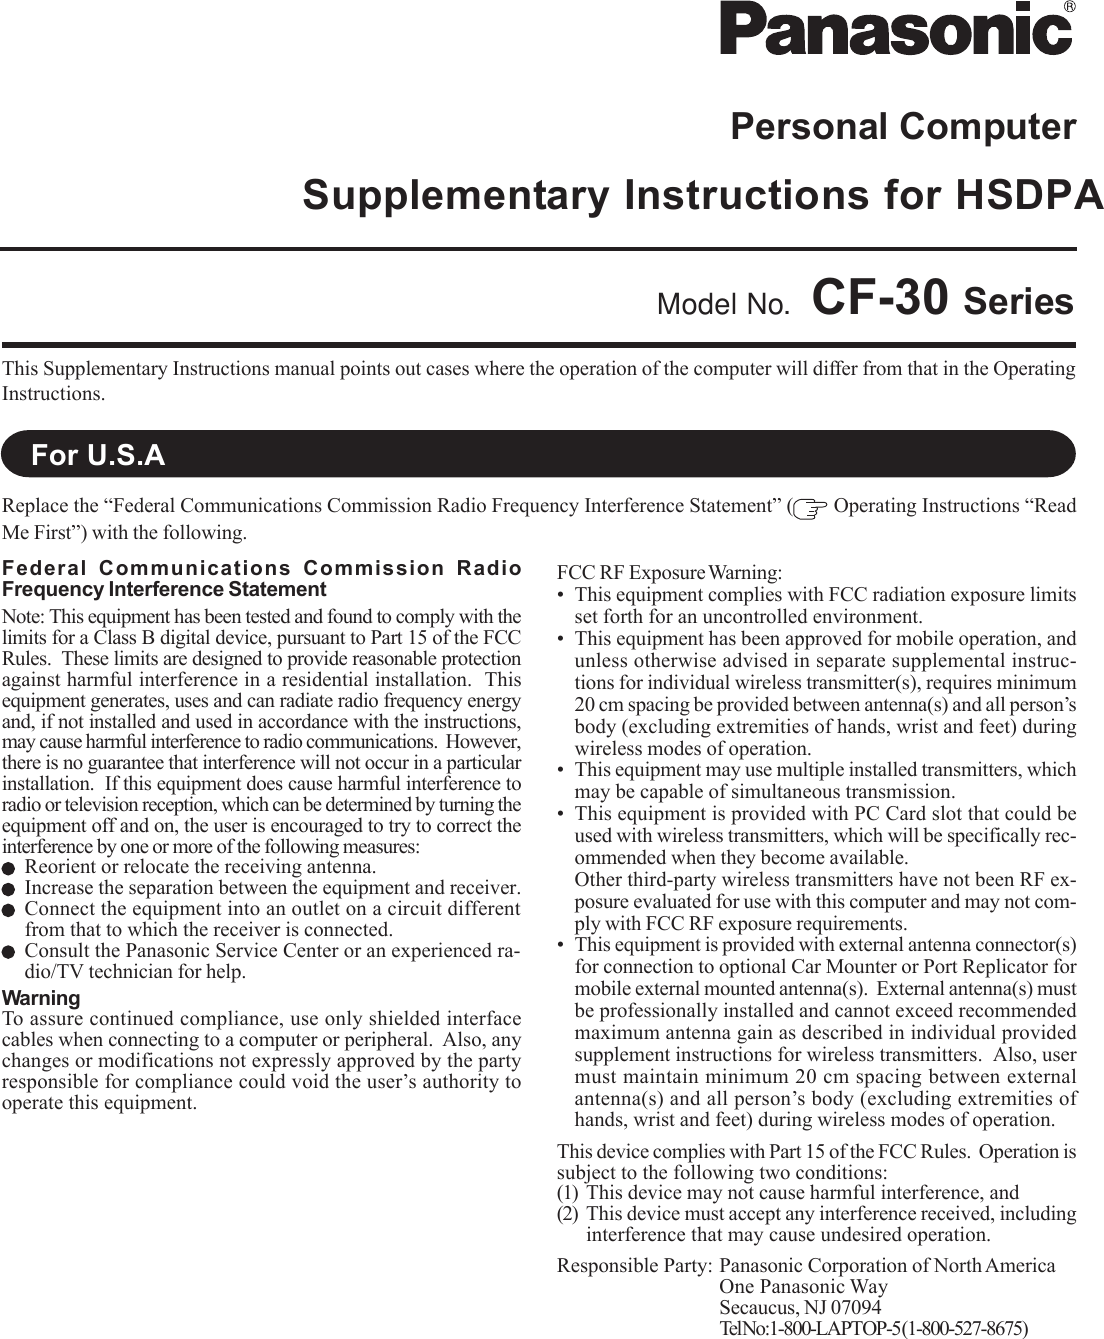 Personal ComputerSupplementary Instructions for HSDPAThis Supplementary Instructions manual points out cases where the operation of the computer will differ from that in the OperatingInstructions.Model No. CF-30 SeriesReplace the “Federal Communications Commission Radio Frequency Interference Statement” (  Operating Instructions “ReadMe First”) with the following.For U.S.AFederal Communications Commission RadioFrequency Interference StatementNote: This equipment has been tested and found to comply with thelimits for a Class B digital device, pursuant to Part 15 of the FCCRules.  These limits are designed to provide reasonable protectionagainst harmful interference in a residential installation.  Thisequipment generates, uses and can radiate radio frequency energyand, if not installed and used in accordance with the instructions,may cause harmful interference to radio communications.  However,there is no guarantee that interference will not occur in a particularinstallation.  If this equipment does cause harmful interference toradio or television reception, which can be determined by turning theequipment off and on, the user is encouraged to try to correct theinterference by one or more of the following measures:Reorient or relocate the receiving antenna.Increase the separation between the equipment and receiver.Connect the equipment into an outlet on a circuit differentfrom that to which the receiver is connected.Consult the Panasonic Service Center or an experienced ra-dio/TV technician for help.WarningTo assure continued compliance, use only shielded interfacecables when connecting to a computer or peripheral.  Also, anychanges or modifications not expressly approved by the partyresponsible for compliance could void the user’s authority tooperate this equipment.FCC RF Exposure Warning:• This equipment complies with FCC radiation exposure limitsset forth for an uncontrolled environment.• This equipment has been approved for mobile operation, andunless otherwise advised in separate supplemental instruc-tions for individual wireless transmitter(s), requires minimum20 cm spacing be provided between antenna(s) and all person’sbody (excluding extremities of hands, wrist and feet) duringwireless modes of operation.• This equipment may use multiple installed transmitters, whichmay be capable of simultaneous transmission.• This equipment is provided with PC Card slot that could beused with wireless transmitters, which will be specifically rec-ommended when they become available.Other third-party wireless transmitters have not been RF ex-posure evaluated for use with this computer and may not com-ply with FCC RF exposure requirements.• This equipment is provided with external antenna connector(s)for connection to optional Car Mounter or Port Replicator formobile external mounted antenna(s).  External antenna(s) mustbe professionally installed and cannot exceed recommendedmaximum antenna gain as described in individual providedsupplement instructions for wireless transmitters.  Also, usermust maintain minimum 20 cm spacing between externalantenna(s) and all person’s body (excluding extremities ofhands, wrist and feet) during wireless modes of operation.This device complies with Part 15 of the FCC Rules.  Operation issubject to the following two conditions:(1) This device may not cause harmful interference, and(2) This device must accept any interference received, includinginterference that may cause undesired operation.Responsible Party: Panasonic Corporation of North AmericaOne Panasonic WaySecaucus, NJ 07094Tel No:1-800-LAPT OP-5 (1-800-527-8675)